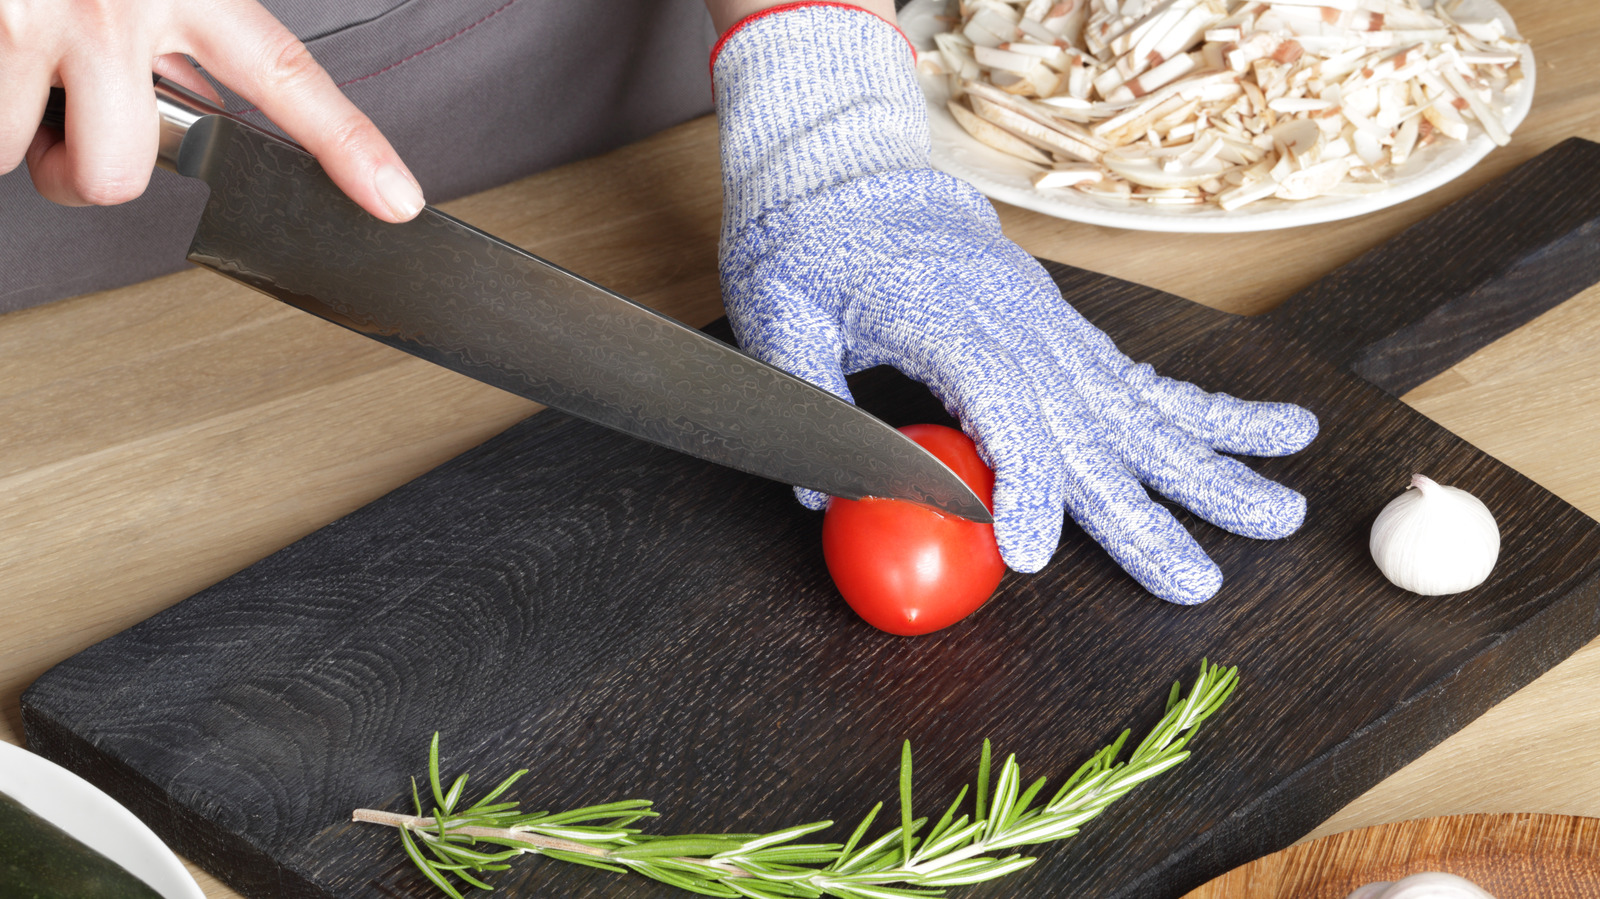 https://www.thedailymeal.com/img/gallery/will-cut-resistant-gloves-actually-save-you-in-the-kitchen/l-intro-1699388862.jpg